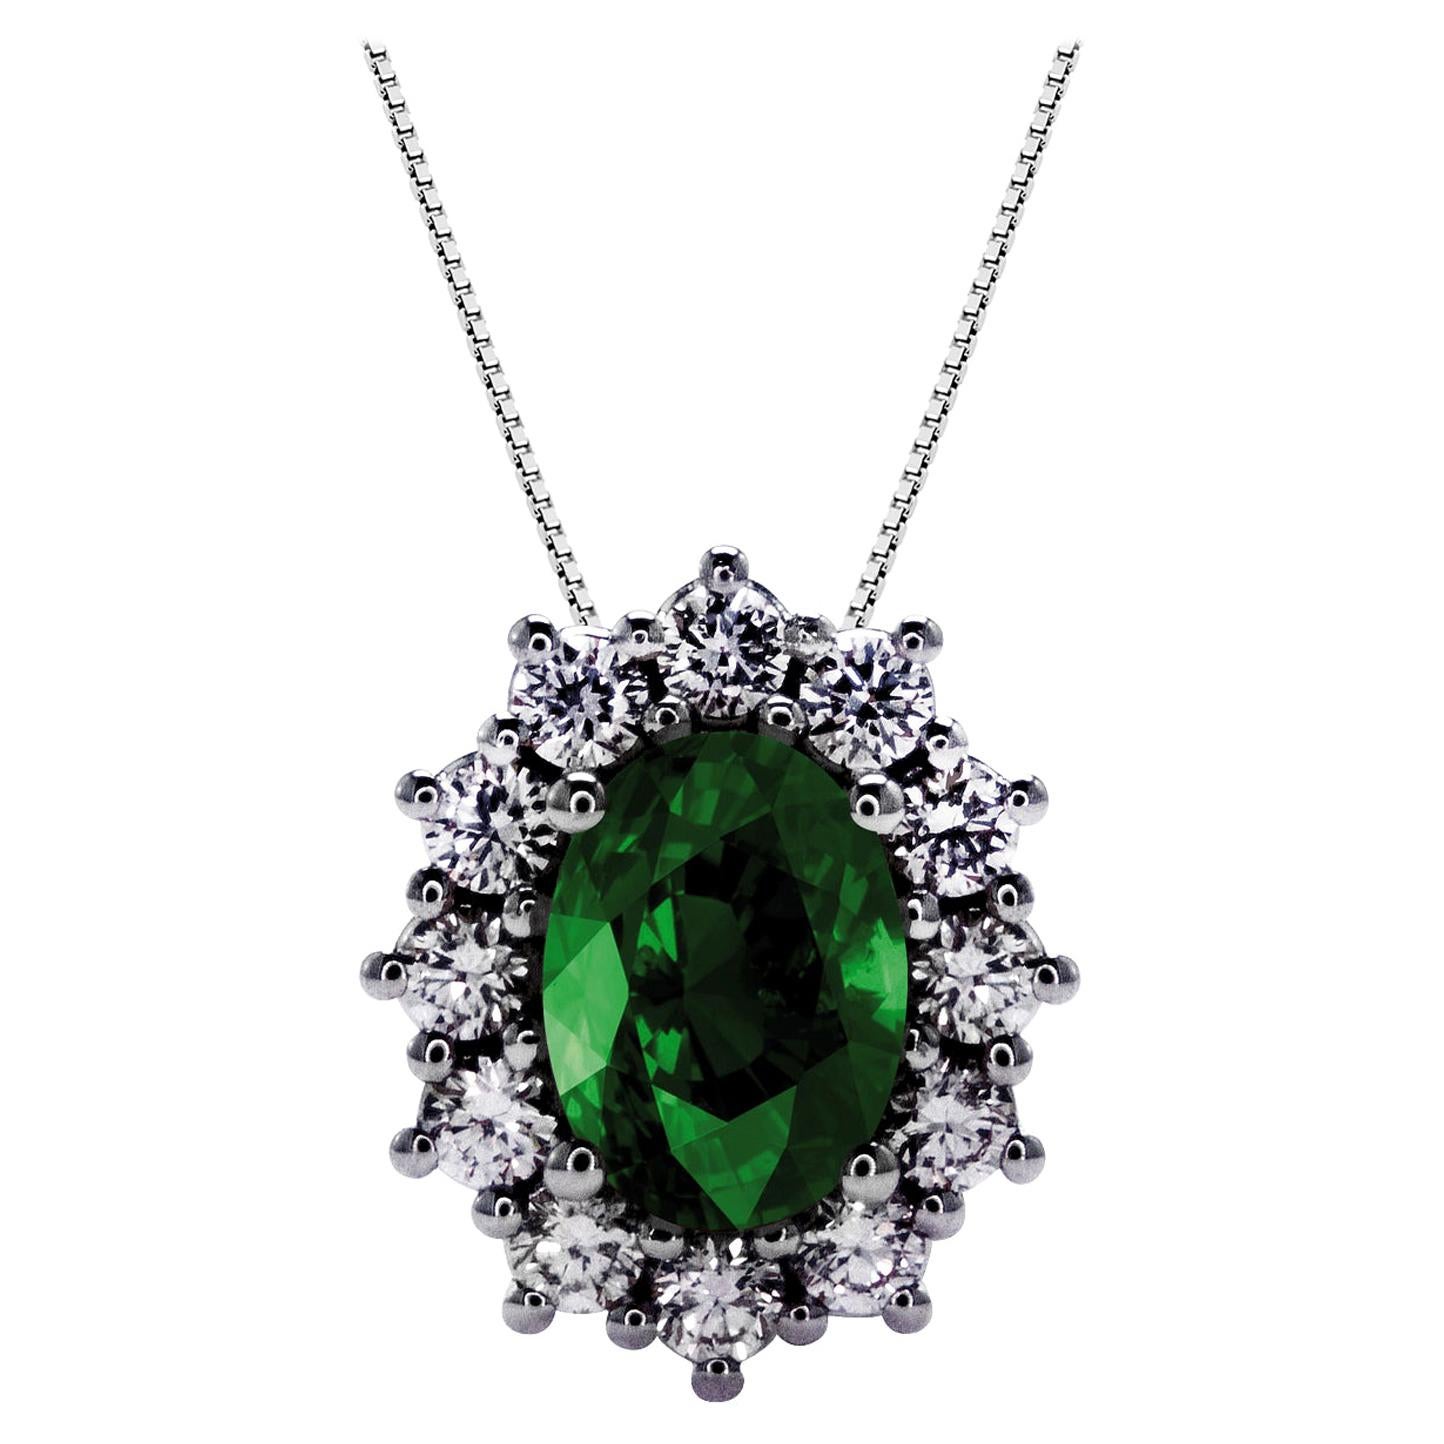 0.76 Carat Emerald and 0.36 Carat Diamonds in 18Kt White Gold Pendant Necklace